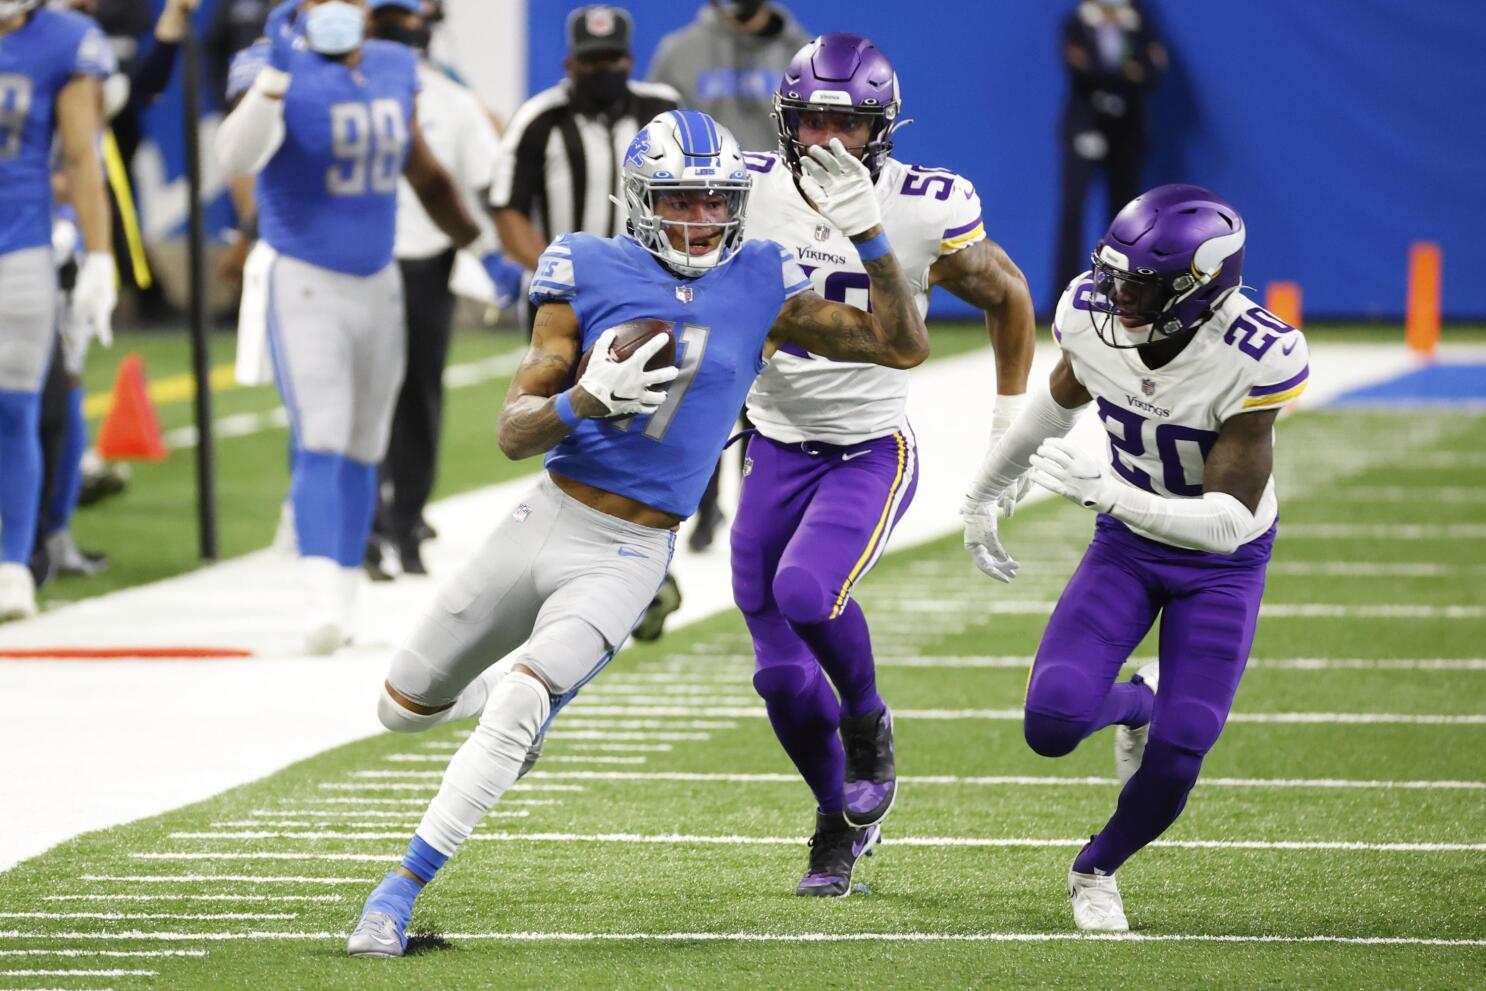 Marvin Jones back to play for an improved Detroit Lions team